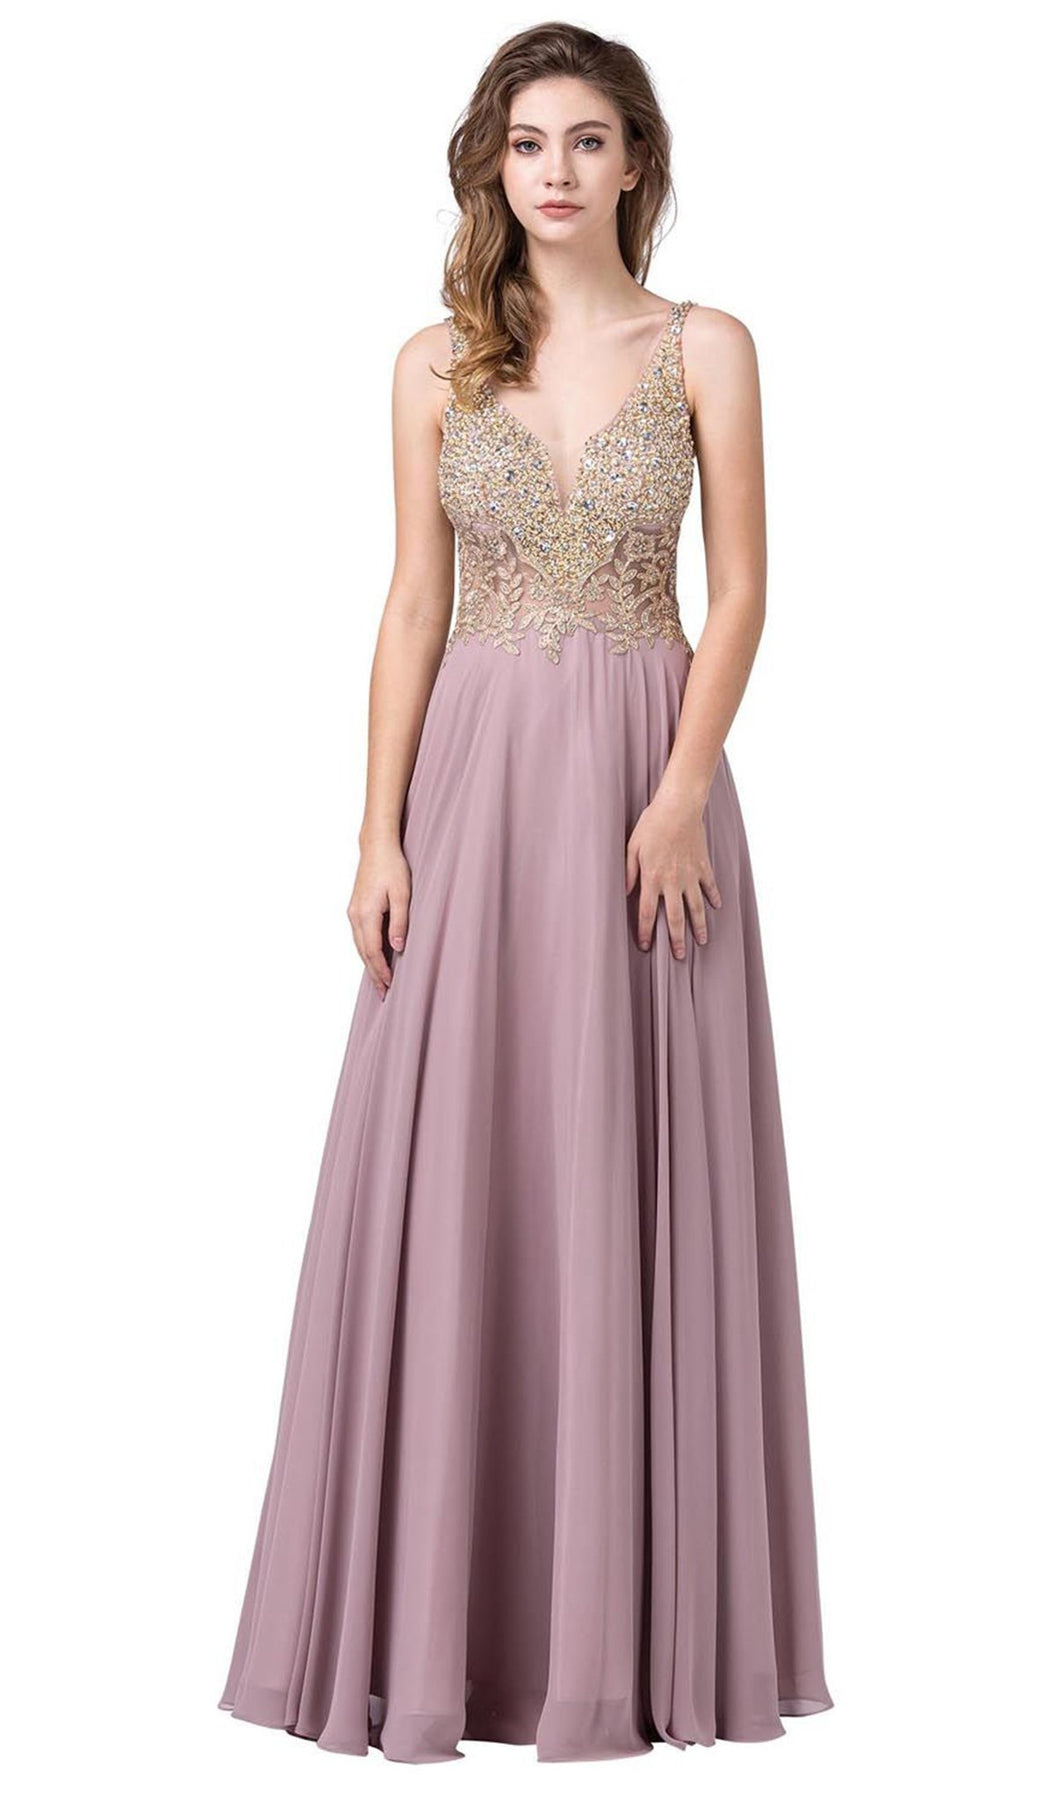 Dancing Queen - 2494 Jewel Encrusted Bodice A-Line Chiffon Gown In Brown